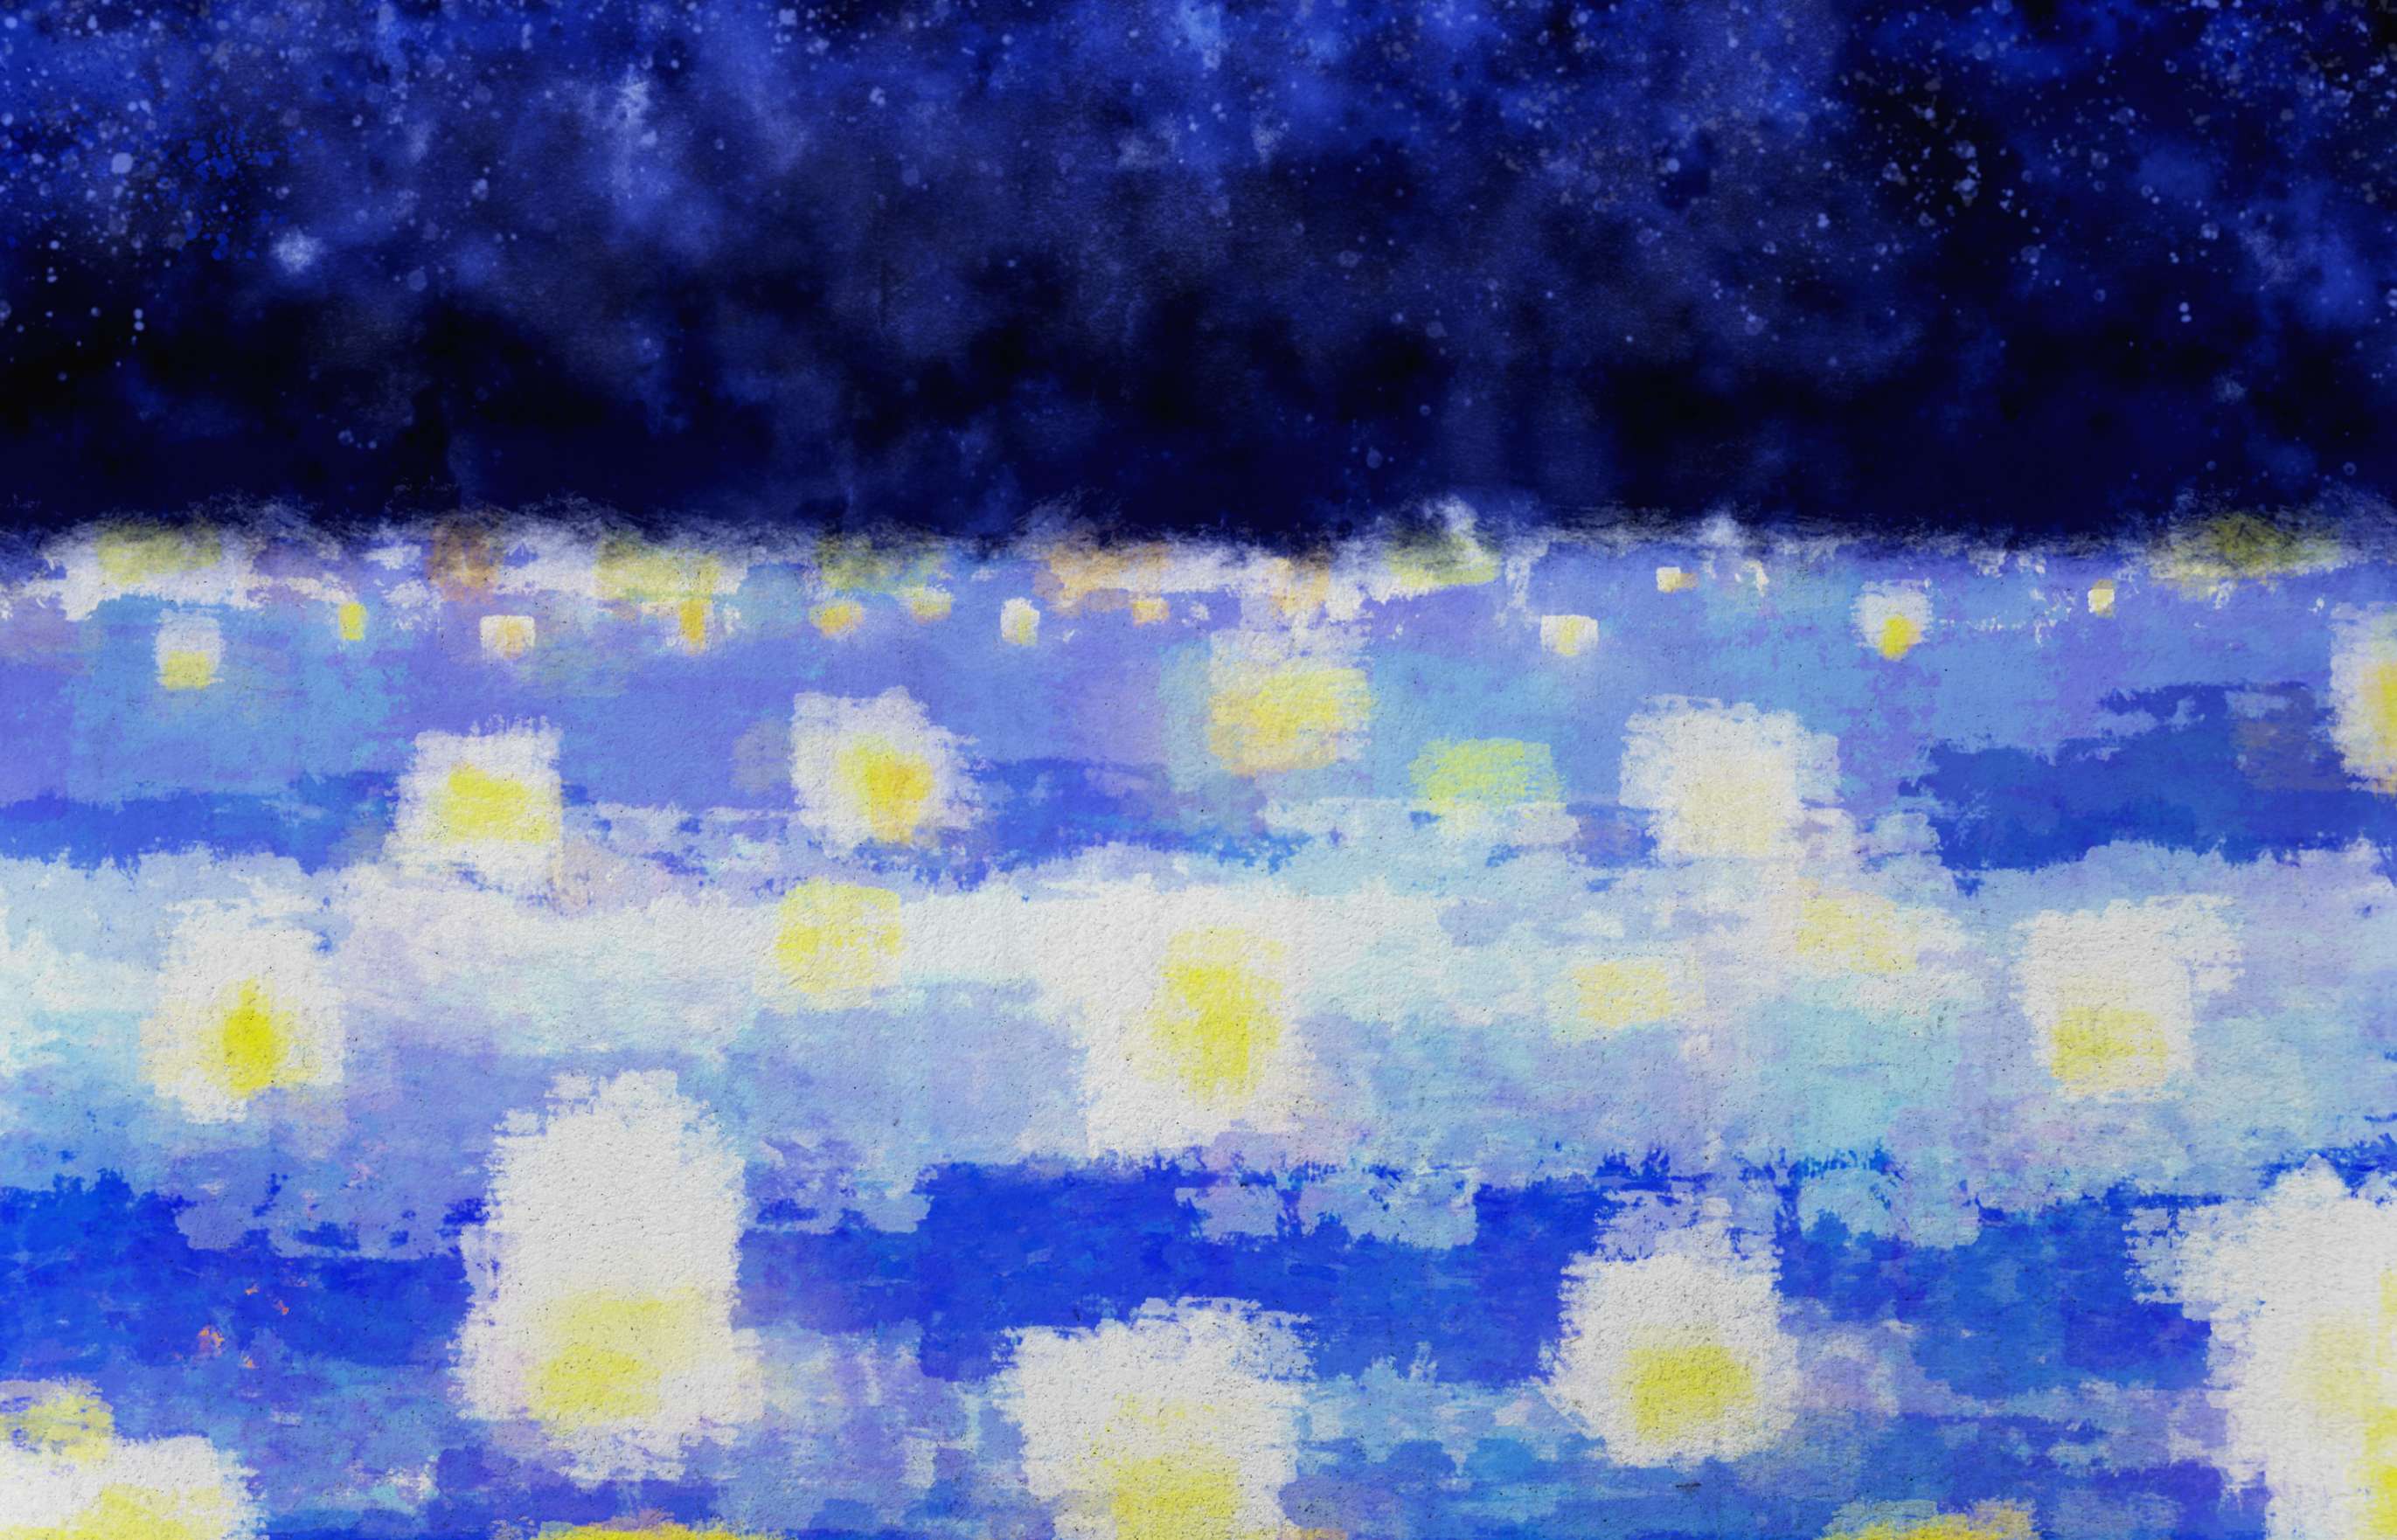 Impressionistic daubs of yellow and white paint mottled on a background of dark and light blue paint suggest lanterns on a body of water, over which stretches a deep, nearly black band flecked with white specks, suggesting a starry nighttime sky.